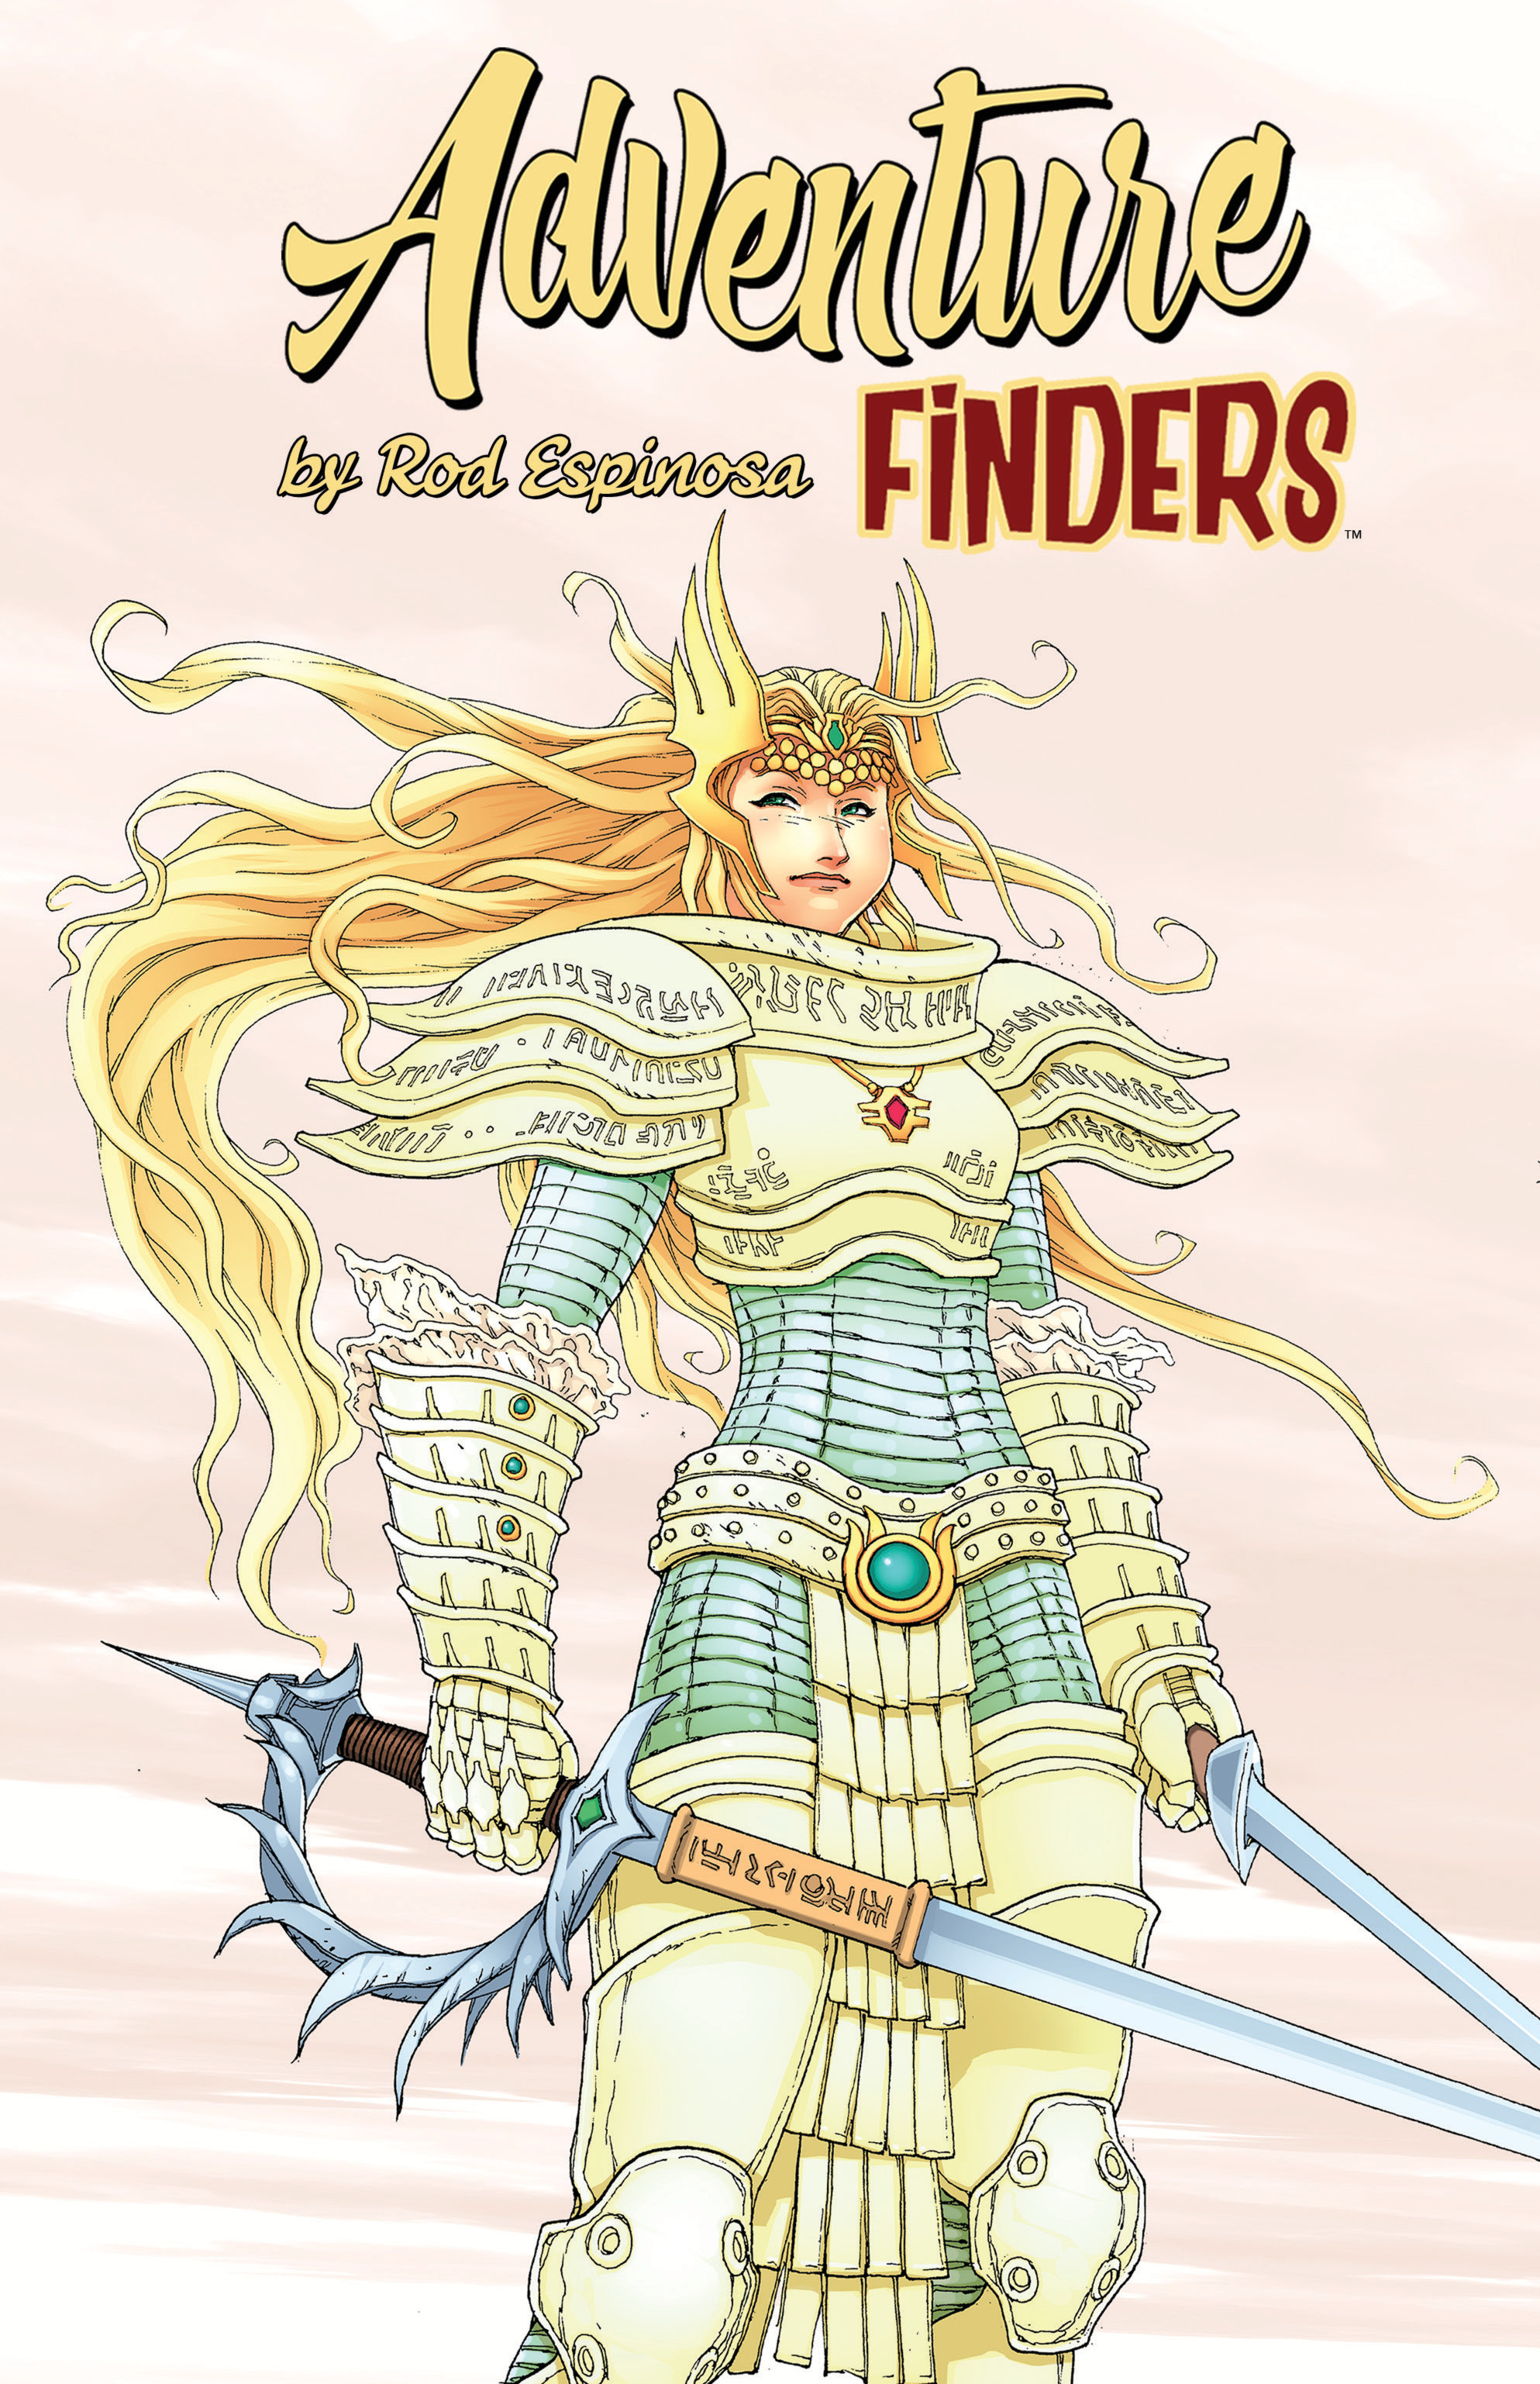 Read online Adventure Finders comic -  Issue # _TPB (Part 1) - 2